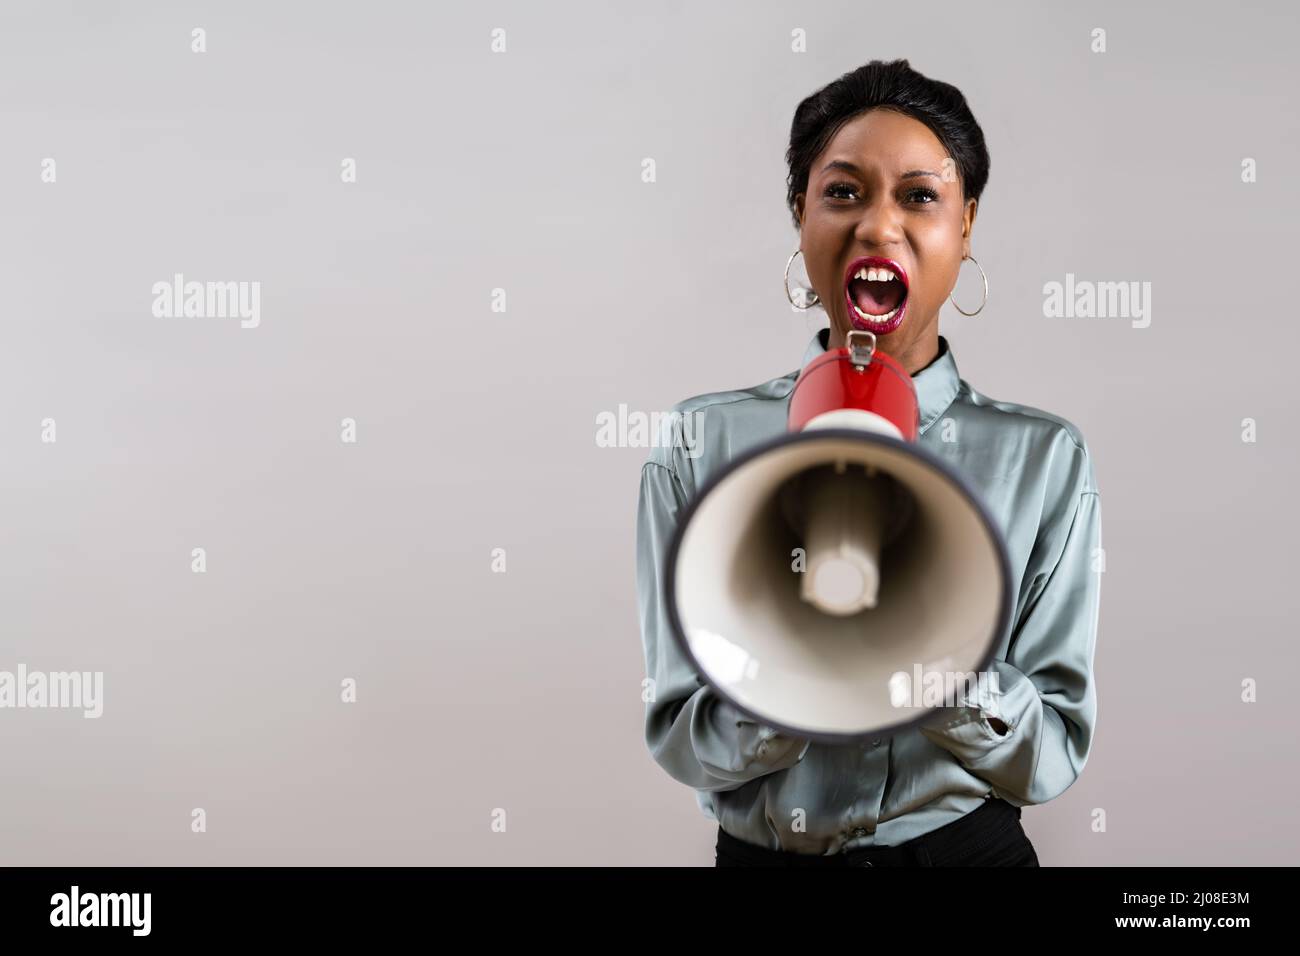 People Shout And Scream Through Megaphone For Attention Stock Photo